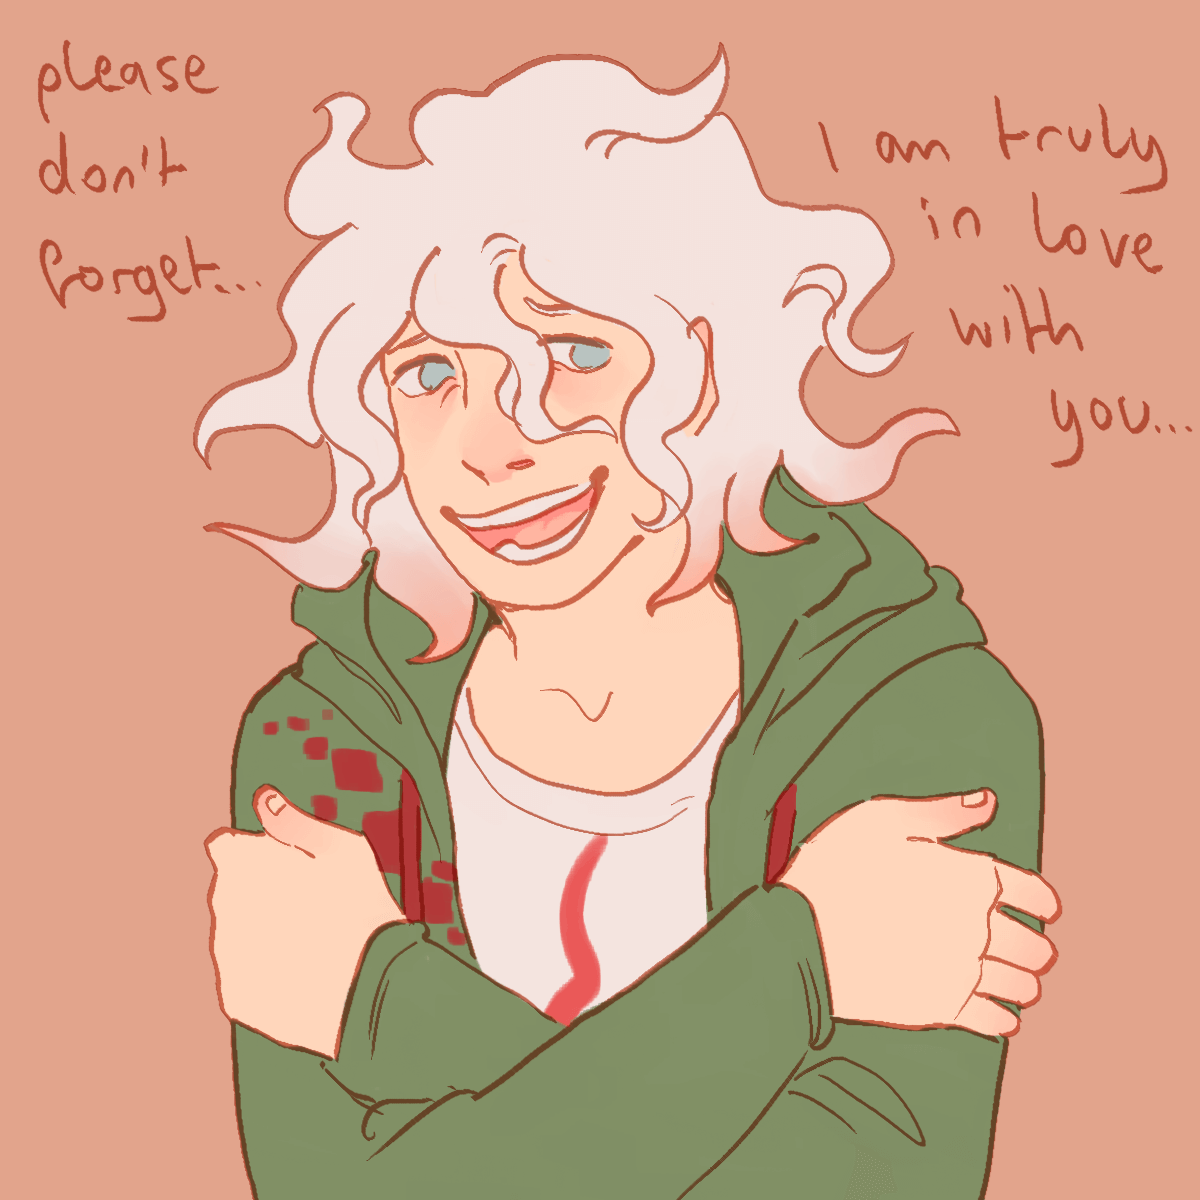 a drawing of nagito's free time event. he is saying 'please don't forget, I am
		truly in love with you..' and trails off.